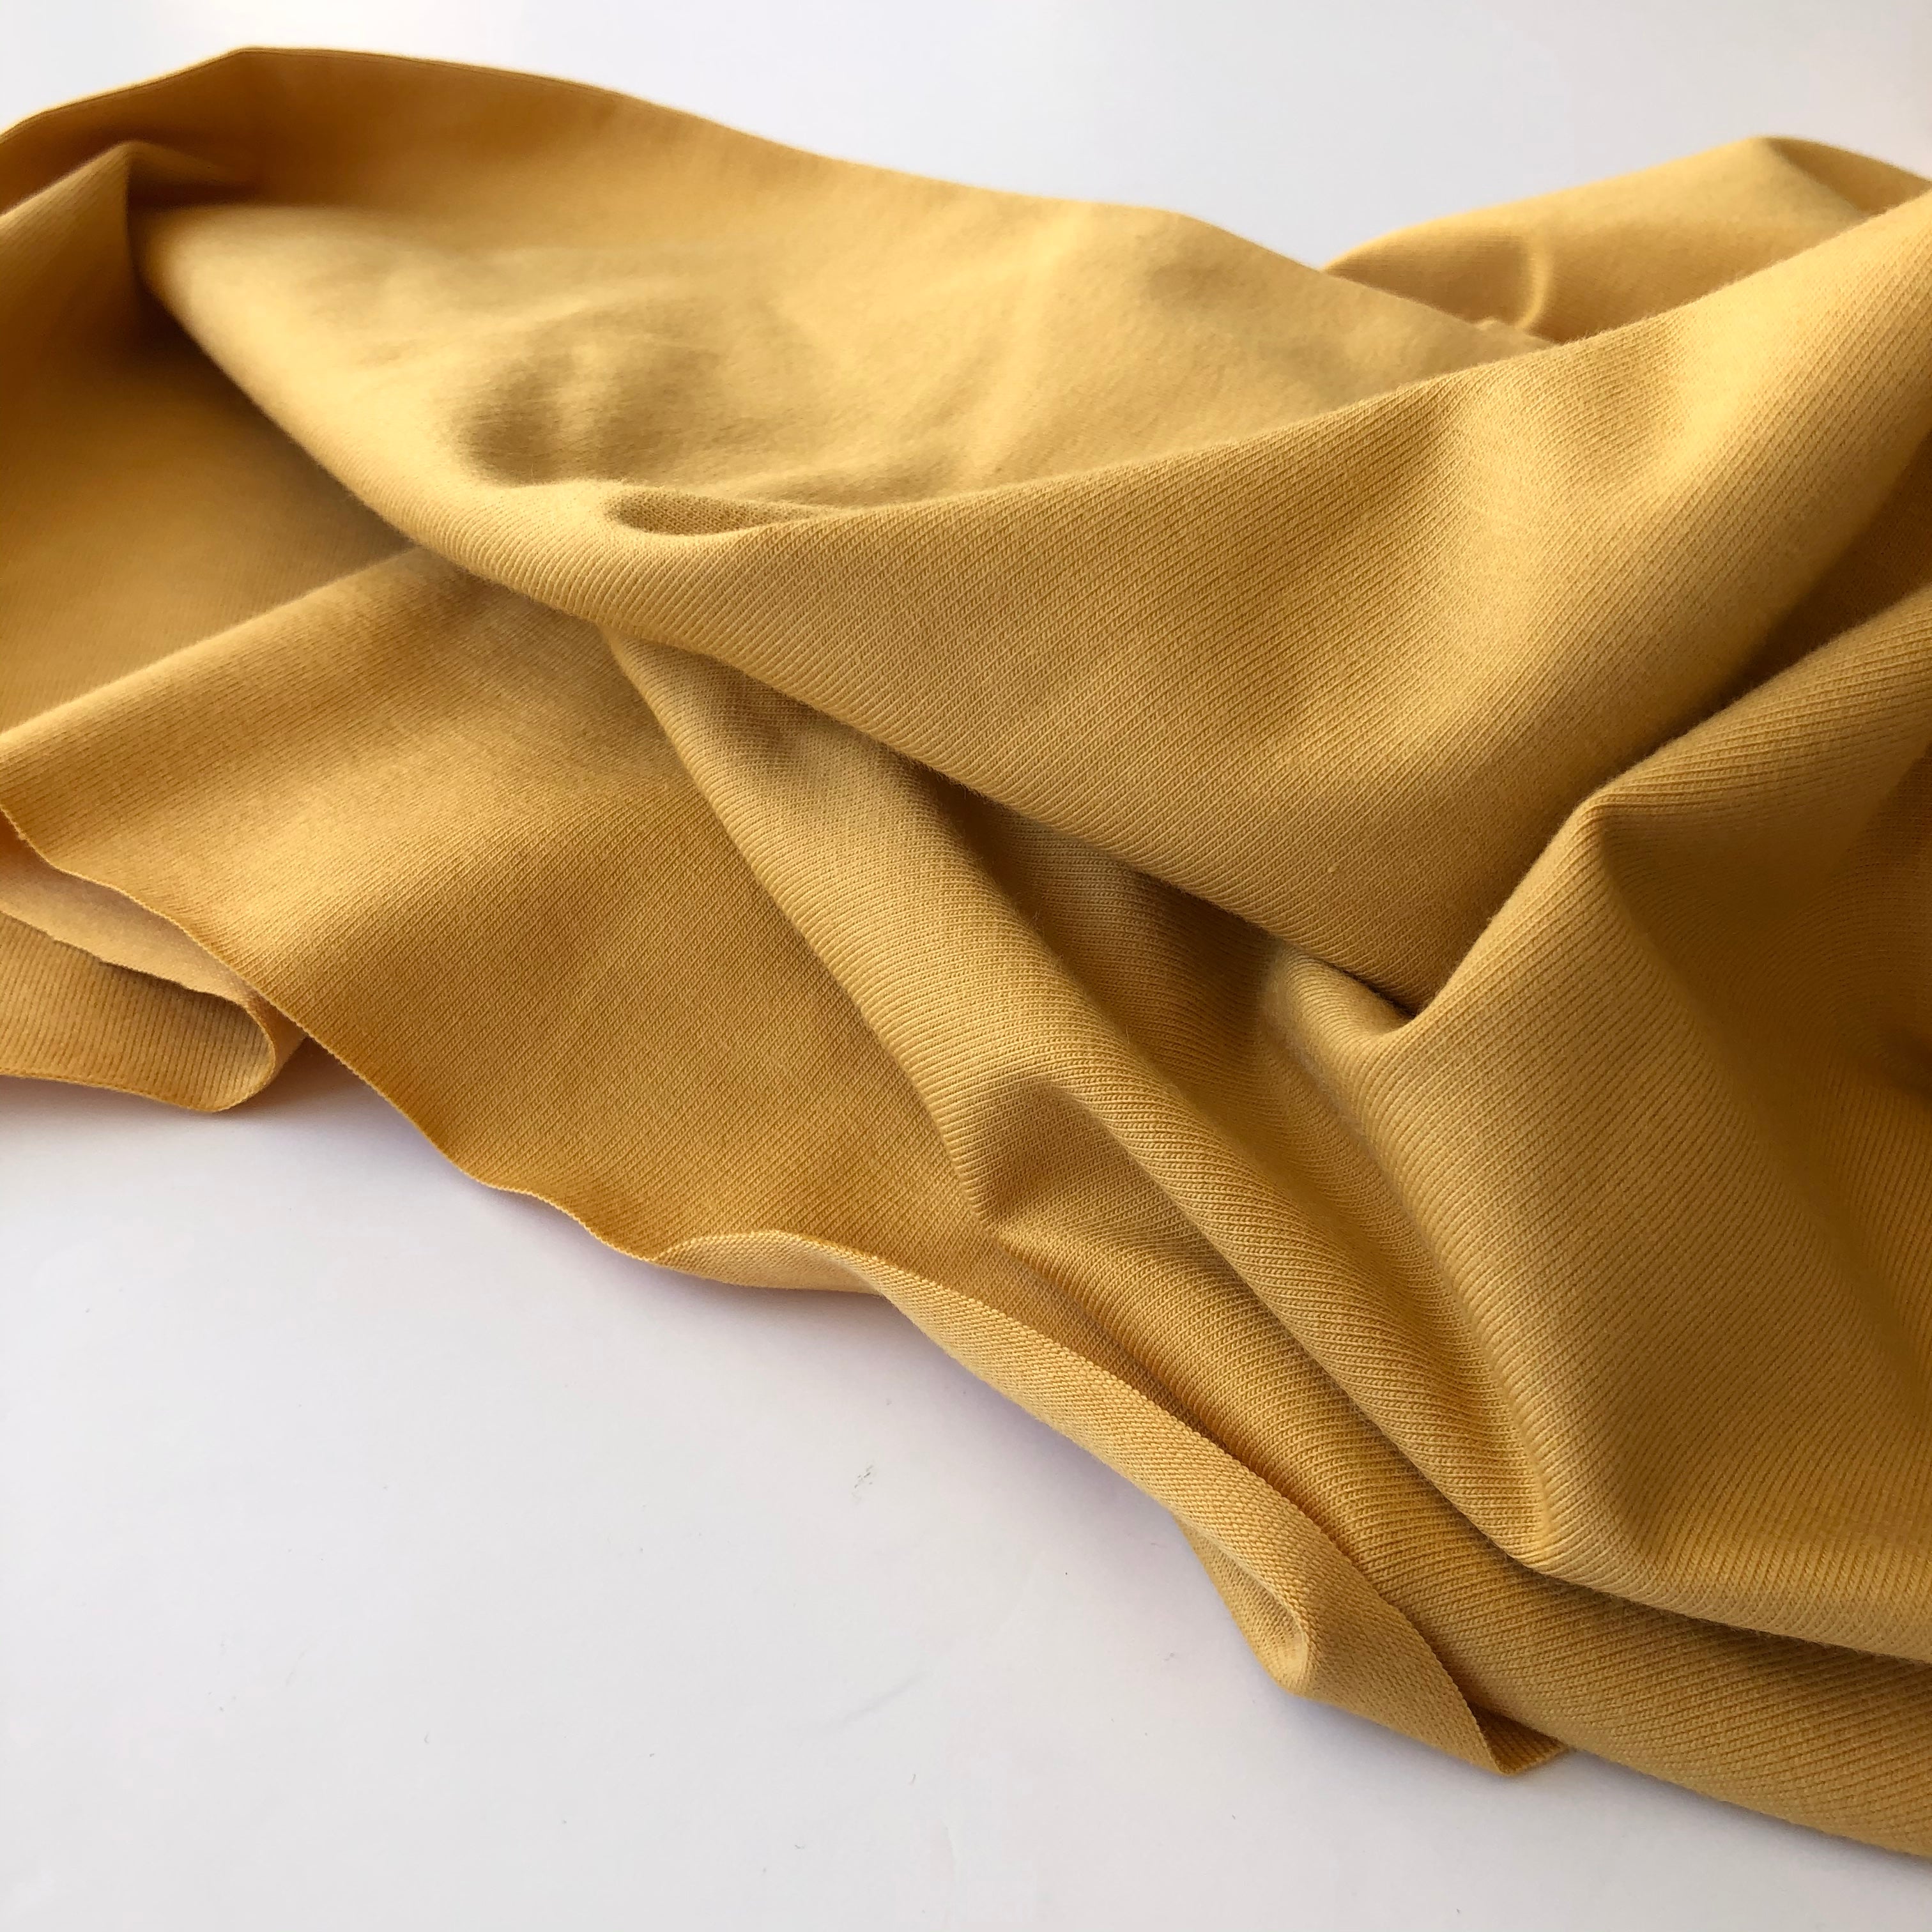 REMNANT 1.00 Metre with washable dirt marks - Essential Chic Amber Plain Cotton Jersey Fabric